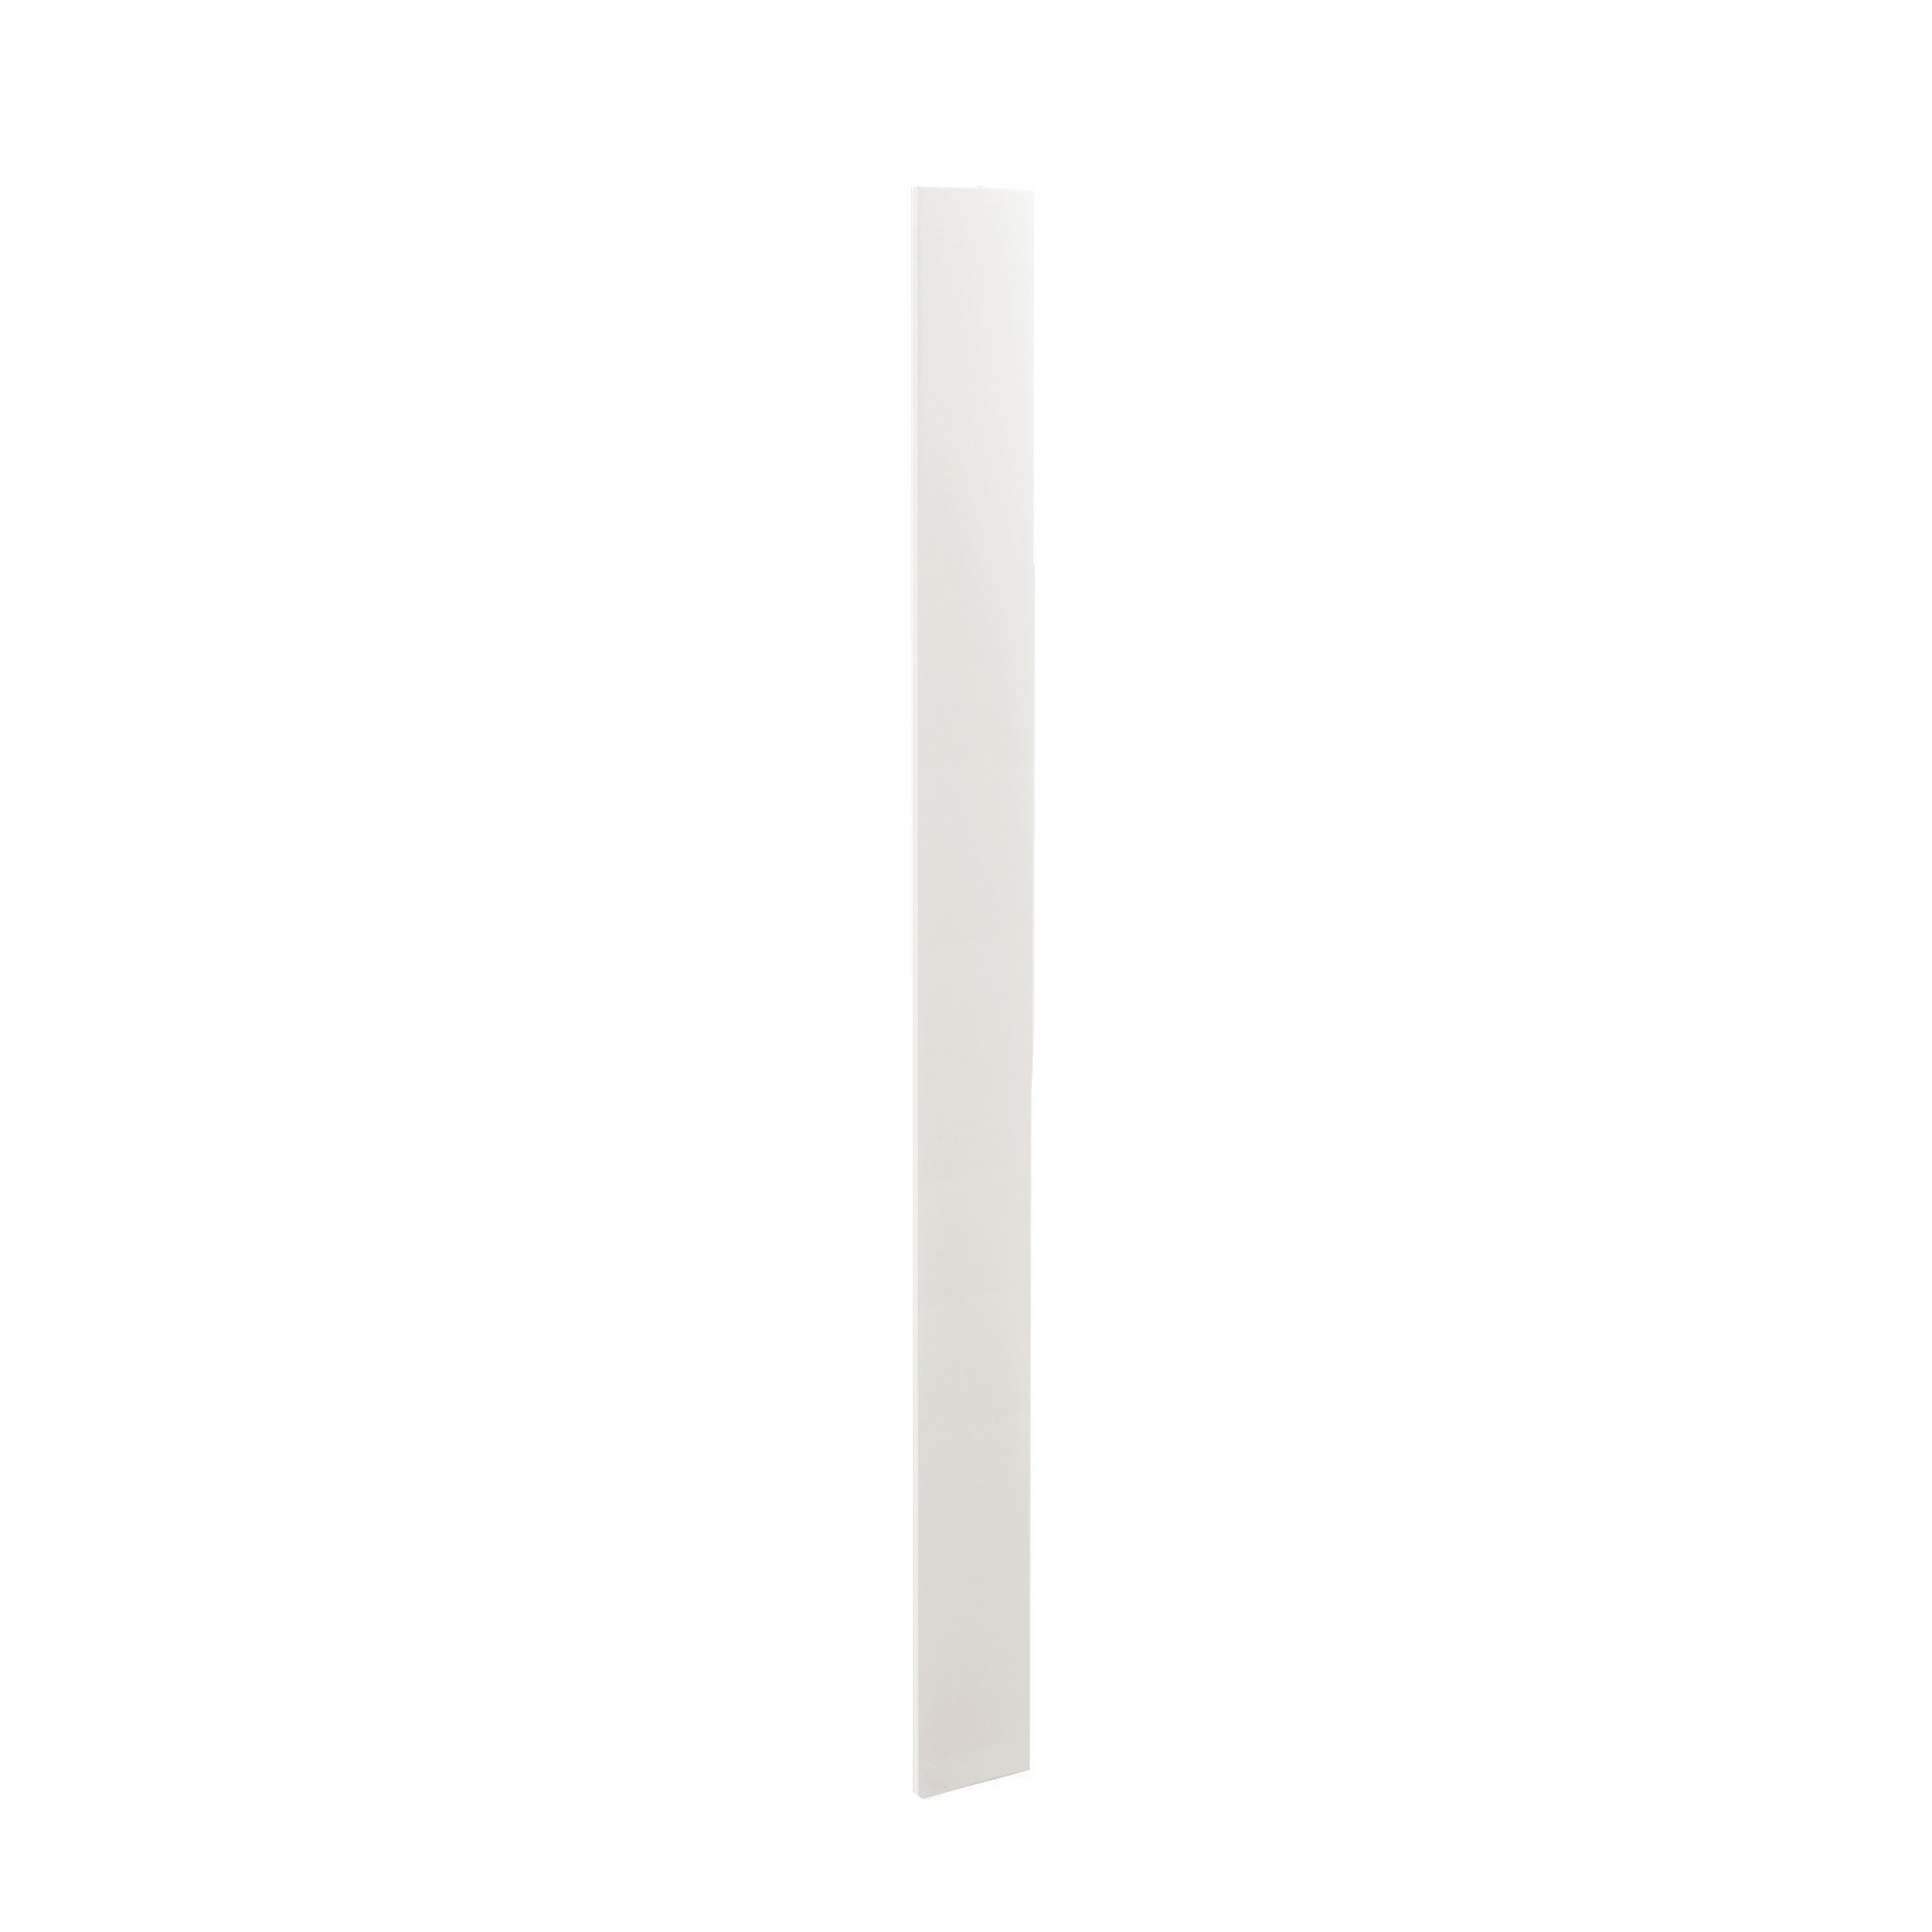 Snow White Shaker Inset Cabinet Filler Trim Pieces